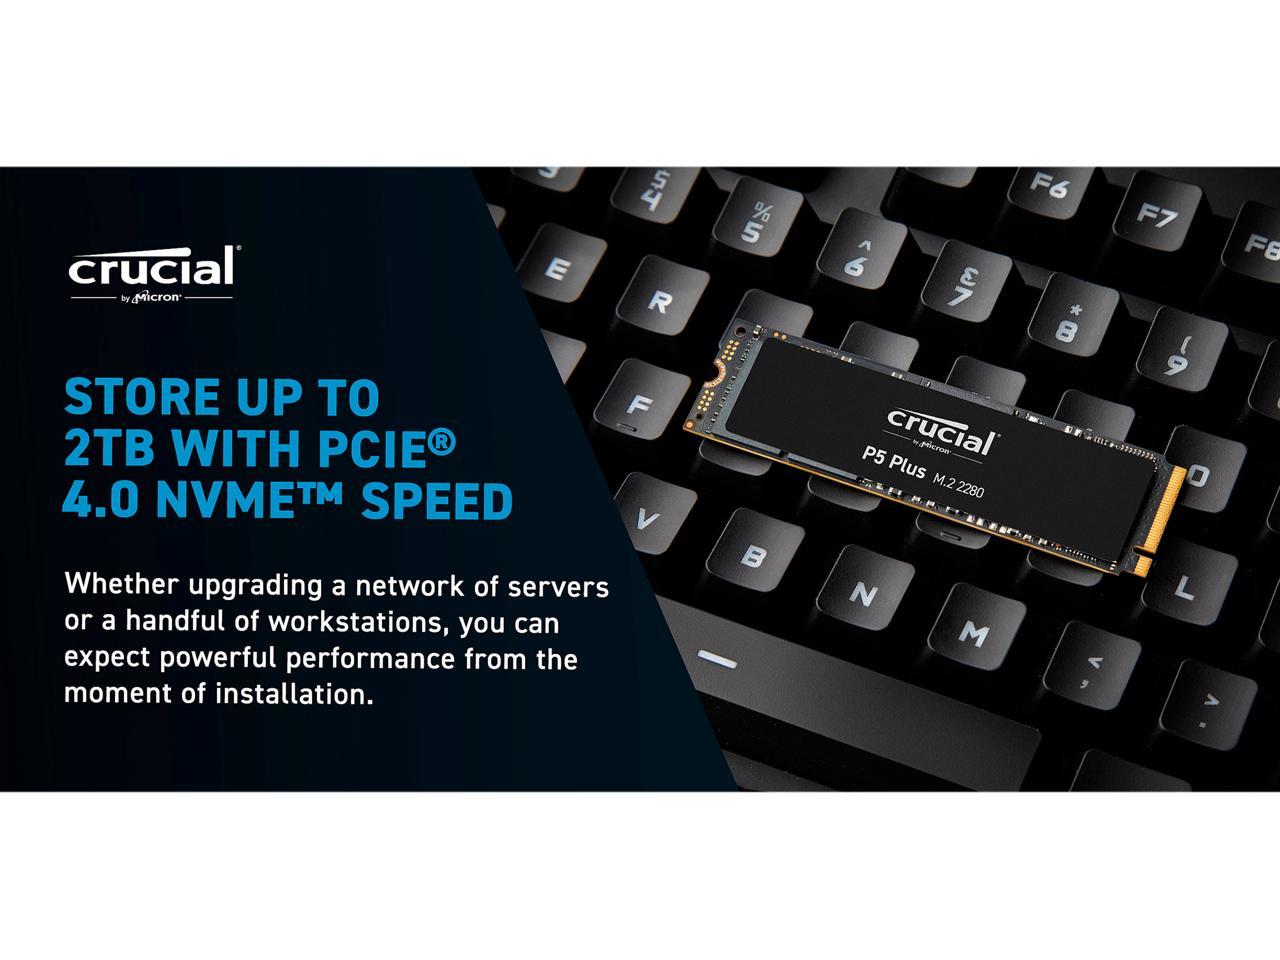 Crucial P5 Plus M.2 500Gb Pci-Express 4.0 Nvme 3D Nand Internal Solid State Drive (Ssd) Ct500P5Pssd8